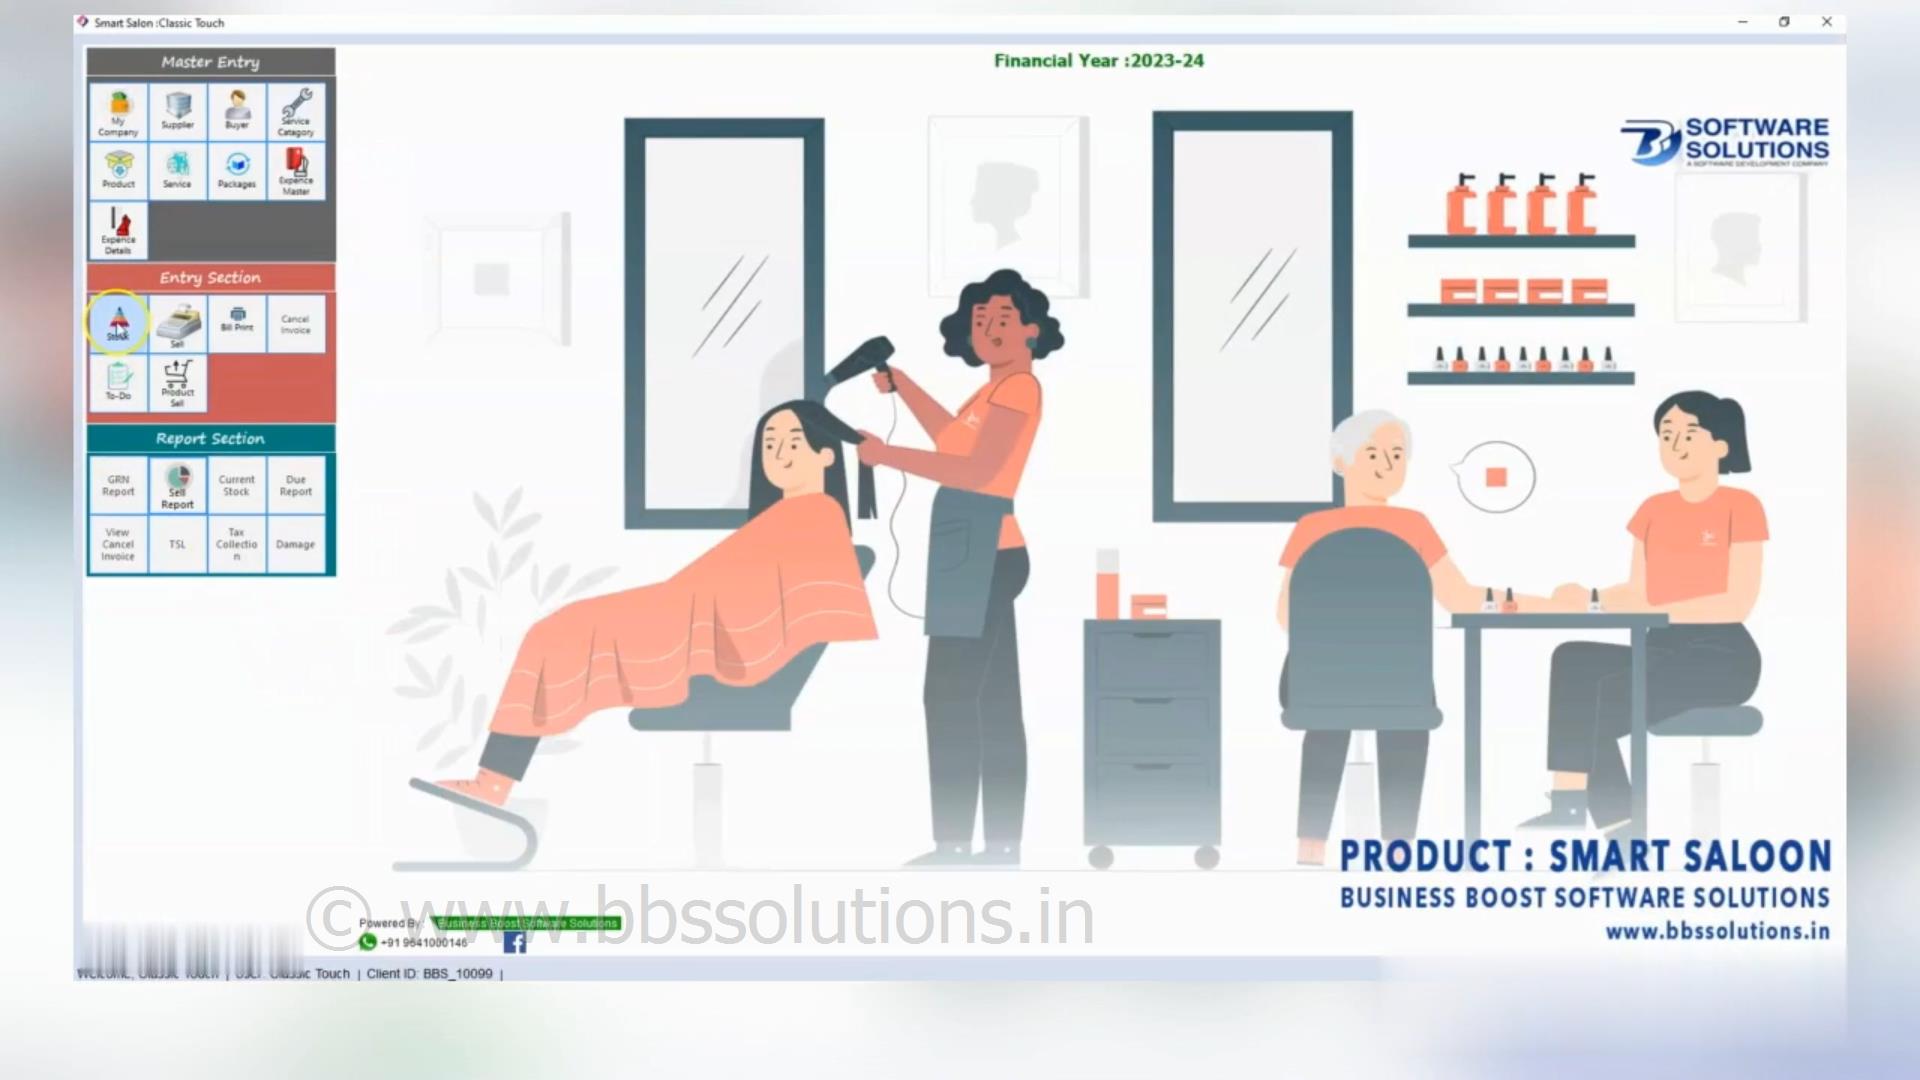 Revolutionize Your Salon with Cloud-Based Designer Salon Management Software | WhatsApp Integration, POS, Billing & More! || Revolutionizing Salon Management: Cloud-Based Software with WhatsApp Integration | Demo & Features  , Business Boost Software Solutions do Best Software ,Web Development,Mobile App solutions provider in siliguri , india, WestBengal , Assam , Siliguri , Jalpaiguri ,Dhupguri,
    Best website designing in Siliguri with affordable packages and quick support. Get effective website design in Siliguri from best website designers. #bbssolutions , #SEO  , #DigitalMarketing  , #WebDesign  , #SoftwareDevelopment  , #FacebookAds  , #GoogleAds  , #GoogleSEO  , #WebsiteDesigning 
     , #Software  , #website  , #BusinessBoostSoftwareSolutions  , bbssolutions,SEO, Digital Marketing, WebDesign, Software Development, Facebook Ads, Google Ads, Google SEO, Website Designing, 
    Software, website, Business Boost Software Solutions, 9641000146,7478180650,best GST software in West bengal,Best GST software company in north bengal,GST solution in west bengal
    ,gst solutions in north bengal,best customize software in siliguri , india,best customize software in west bengal,best customize software in dhupguri,news portal website in west bengal
    ,news portal website in siliguri , india,regional news portal website in siliguri , india,school software in west bengal,school software in north bengal,school website in north bengal,
    school software in north bengal,android app, ios app, ecommerce website, ecommerce software,Web designing, website designing, ecommerce website, how to make website, create website, 
    website development company, web page design, seo, search engine optimization, seo siliguri , india , 
    seo company, best seo company, seo services, responsive web design, web designing companies, 
    how to create a website, internet marketing, digital marketing, online marketing, social media marketing, 
    promotion,web designing in Siliguri,web designing in Siliguri siliguri , india,web designing in siliguri , india,GST Software  ,  GST Billing Software  ,  GST Accounting  ,  GST Ready Software,
    software company in siliguri,software company in siliguri siliguri , india,software company in north east siliguri , india,
    school software in siliguri,school software in north east siliguri , india,customize software,free software demo,
    reasonable price software,cost effective software,resonable price software,free demo software,free software,best software support,free software support,best software company in siliguri , india,
    best software company in siliguri,MLM Software company in Siliguri,Binary Software company in Siliguri,
    top ten software company in north bengal,top ten software company in siliguri,top ten software company in siliguri , india,
    top ten software company in north east,software development siliguri , india,west bengal,kolkata,siliguri , software company in siliguri , india
     , software development west bengal , Customized software siliguri , india , software for hotel,medicine distributors,
    jewellery shop , best software company in siliguri,jalpaiguri,sikkim,darjeeling  , Business Boost Softwate Solutions  ,  
    Web designing company in siliguri  ,  ecommerce designing company in siliguri  ,  web development company in siliguri  ,  
    software development comapny in siliguri  ,  software development in sikkim  ,  website designing company in sikkim  ,  
    SEO service in sikkim  ,  web designing company in siliguri  ,  web designing compnay in North Bengal  ,  
    SEO service in siliguri  ,  web designing in north bengal  ,  web designing in north east siliguri , india , website designing in siliguri, best website designing in siliguri, web design, web designer in siliguri, web designing company siliguri